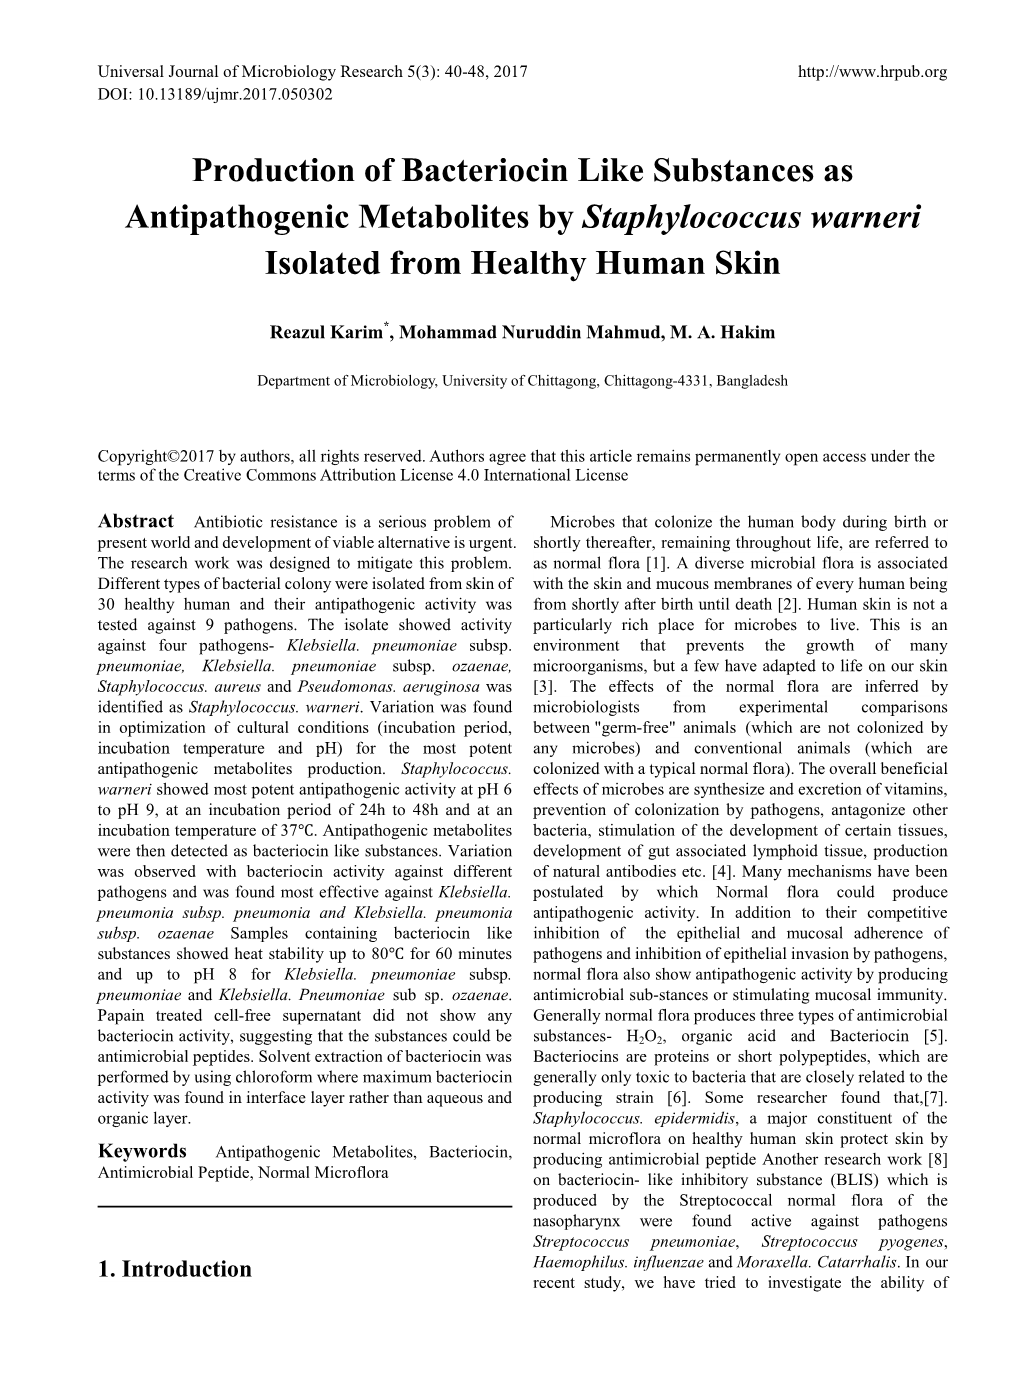 Production of Bacteriocin Like Substances As Antipathogenic Metabolites by Staphylococcus Warneri Isolated from Healthy Human Skin